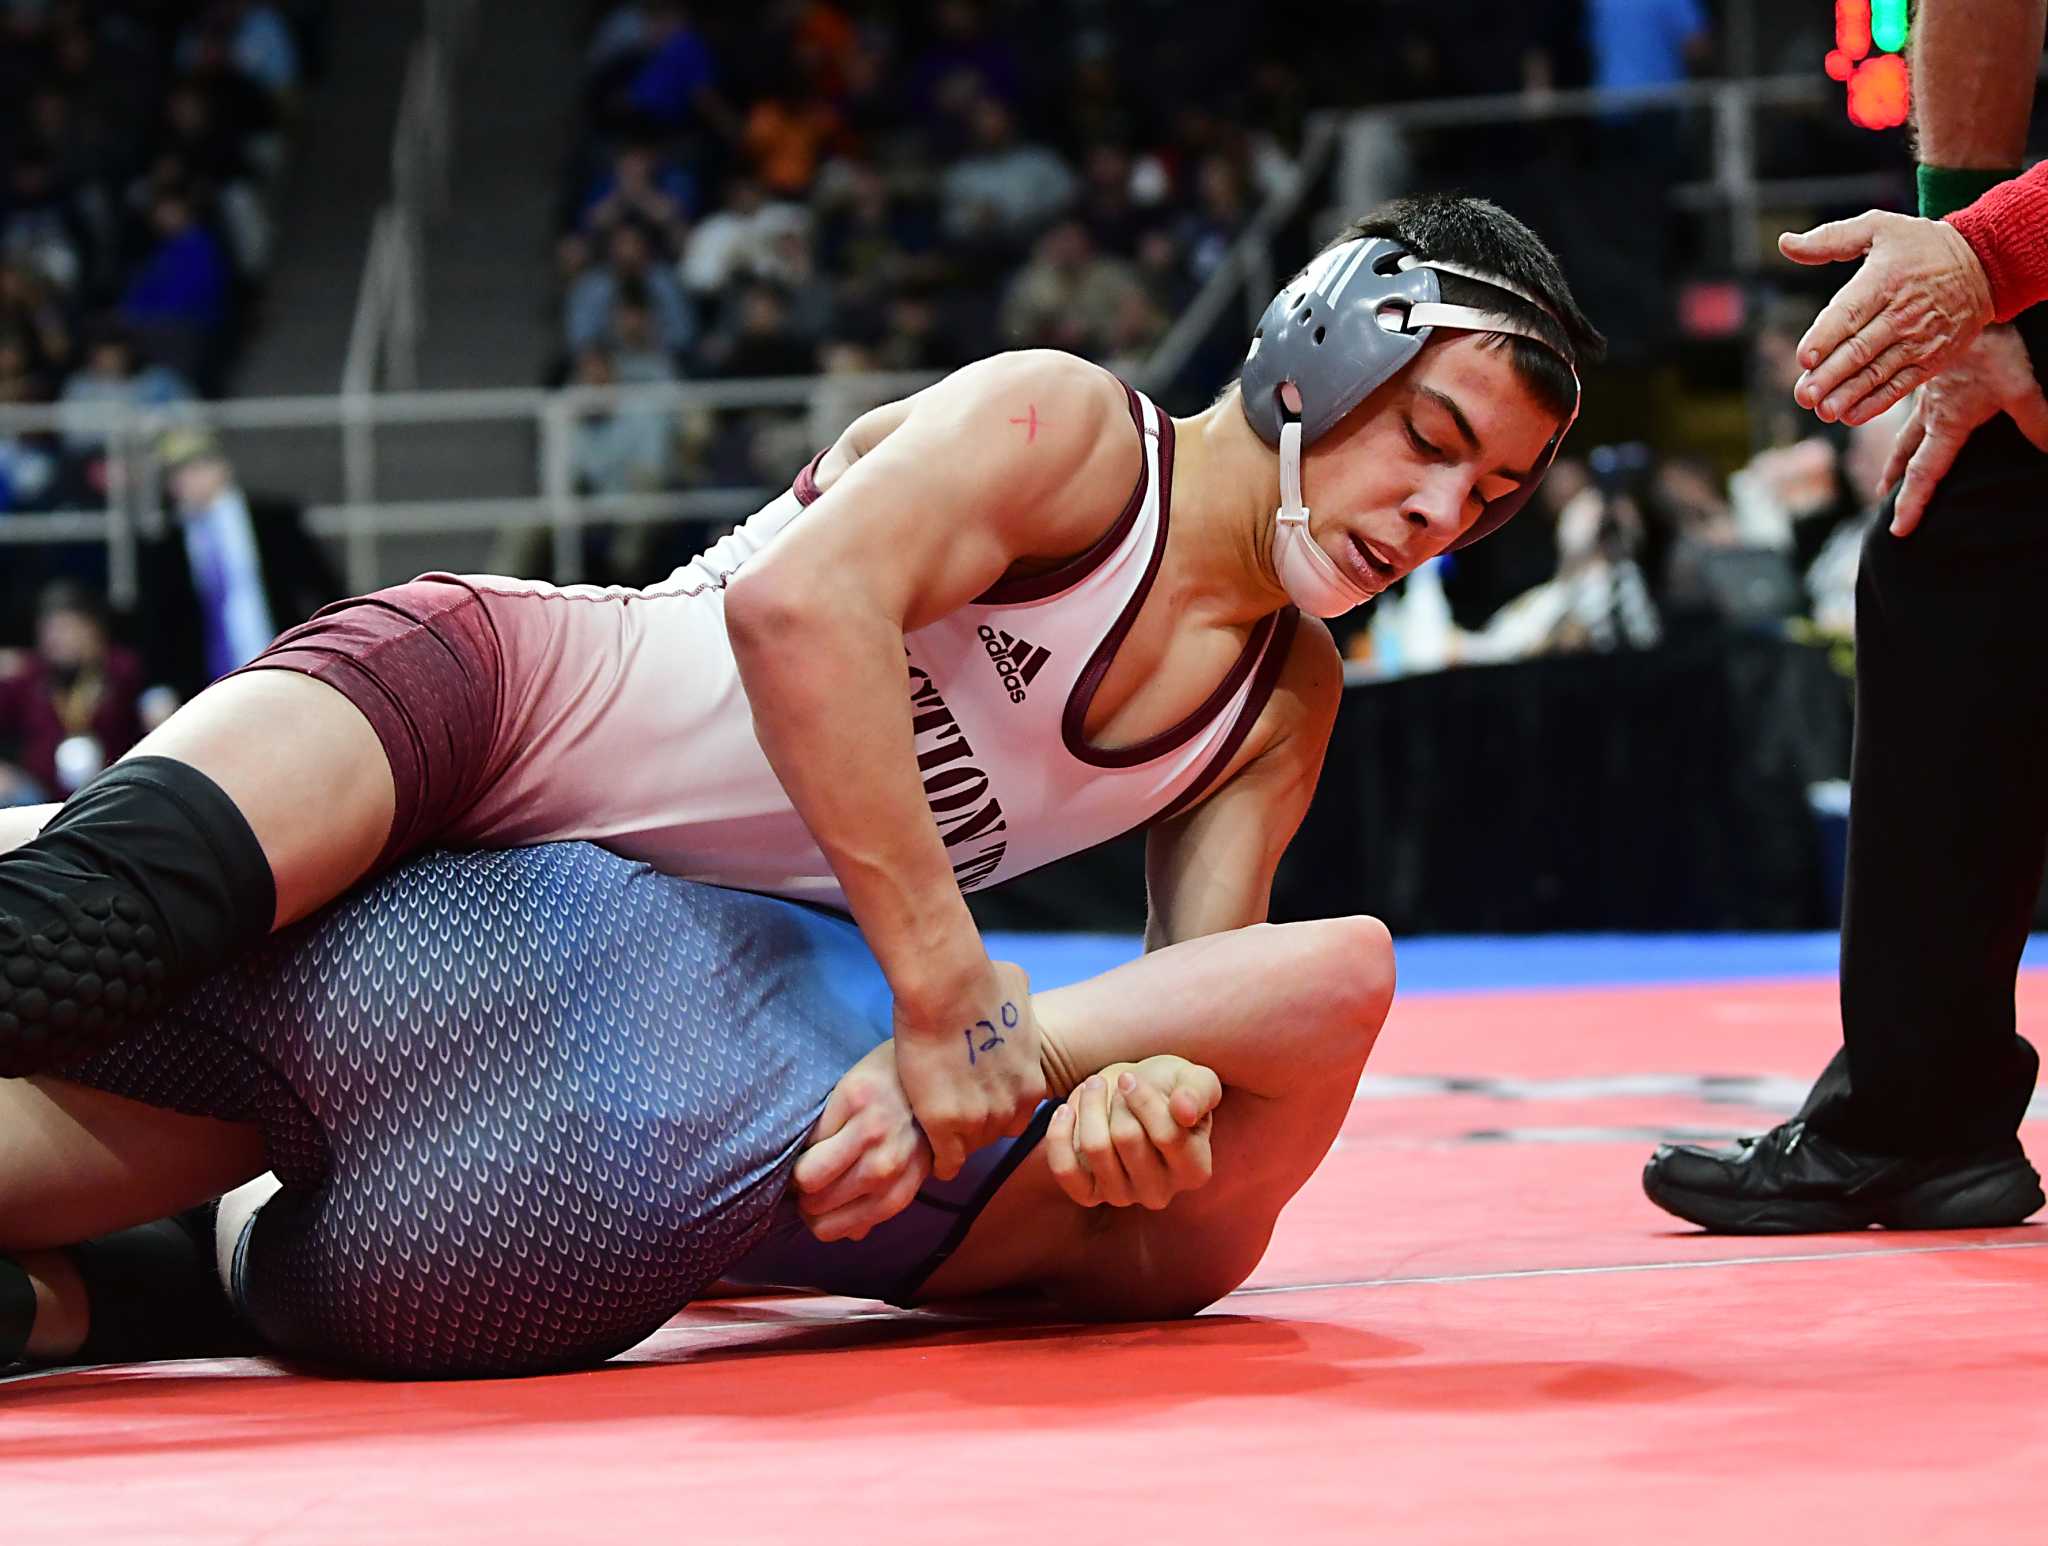 Burnt Hills wrestling team eager for chance to win title